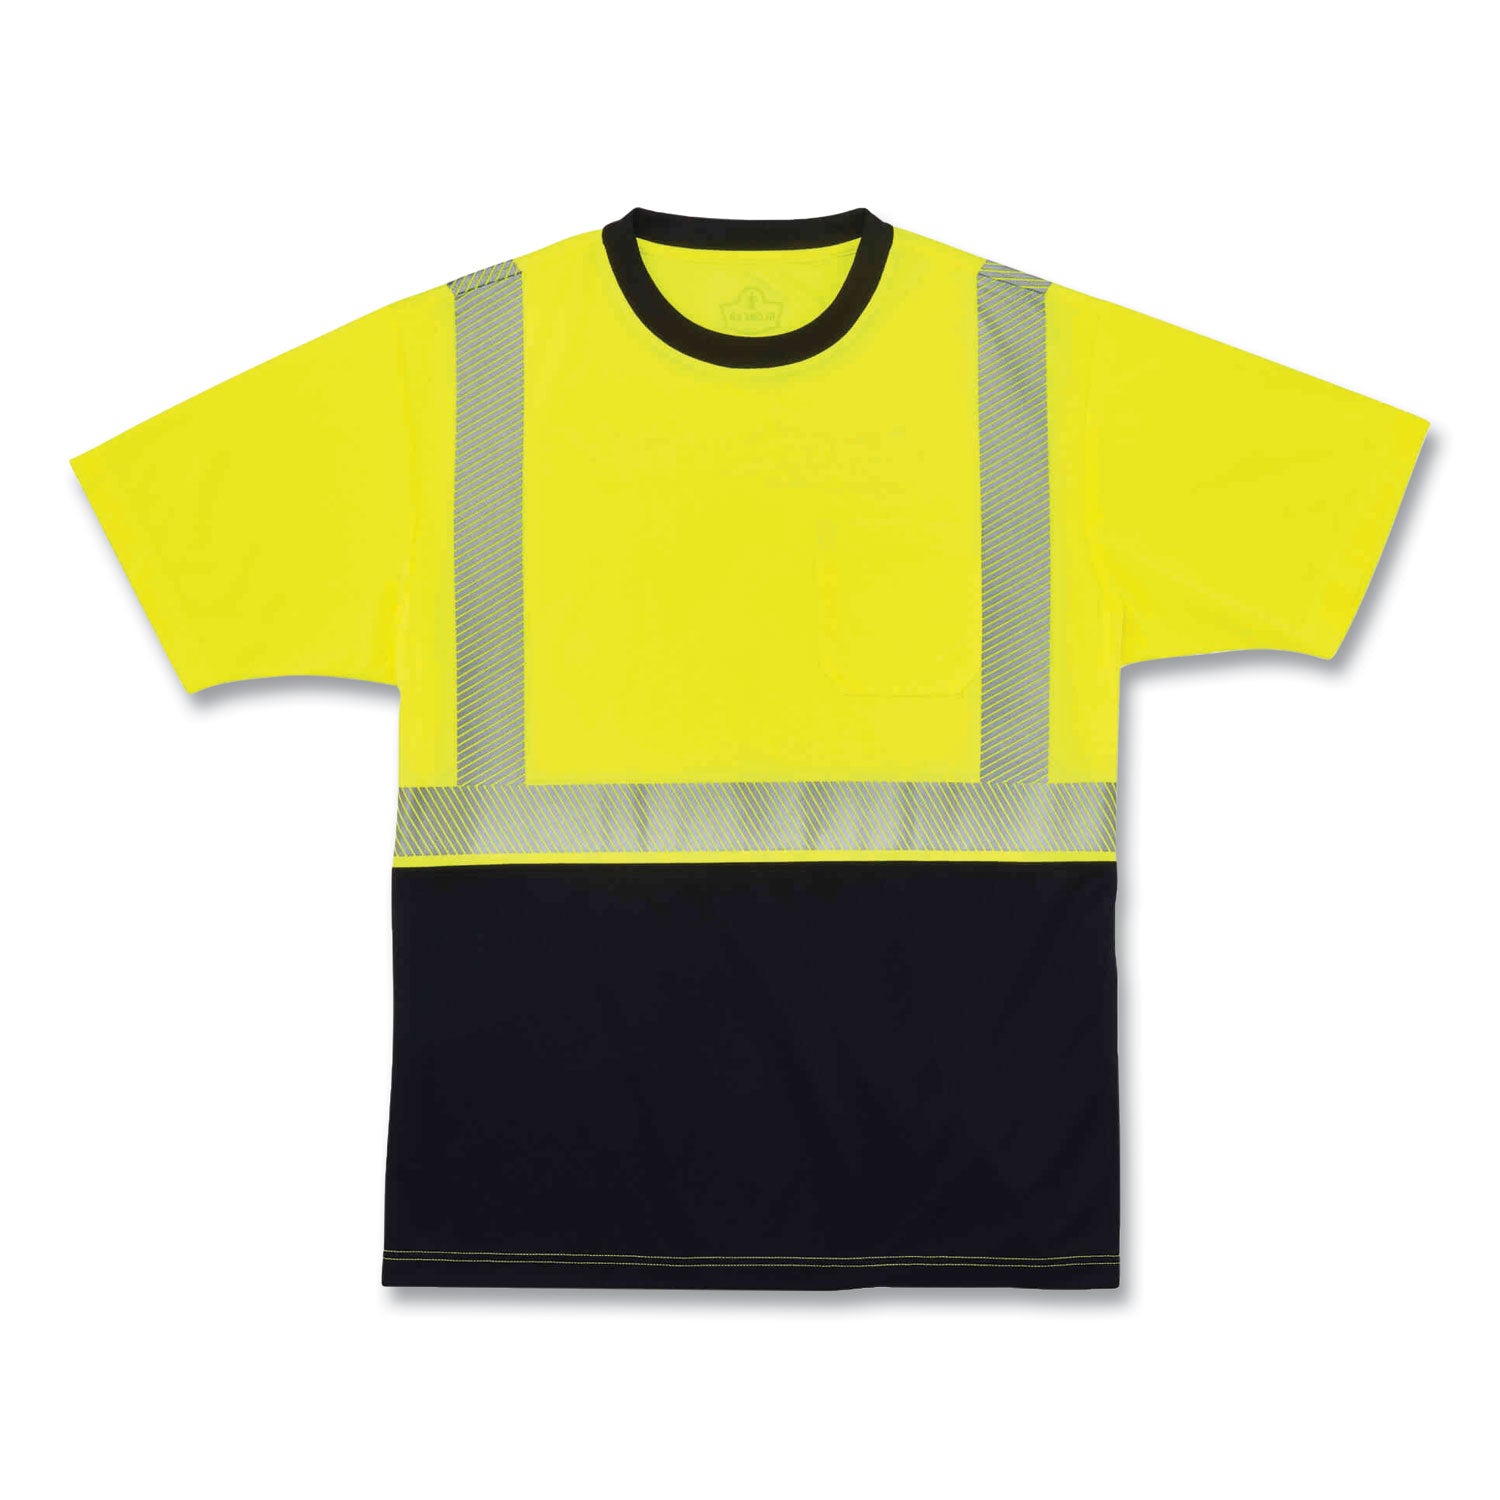 glowear-8280bk-class-2-performance-t-shirt-with-black-bottom-polyester-5x-large-lime-ships-in-1-3-business-days_ego22539 - 1